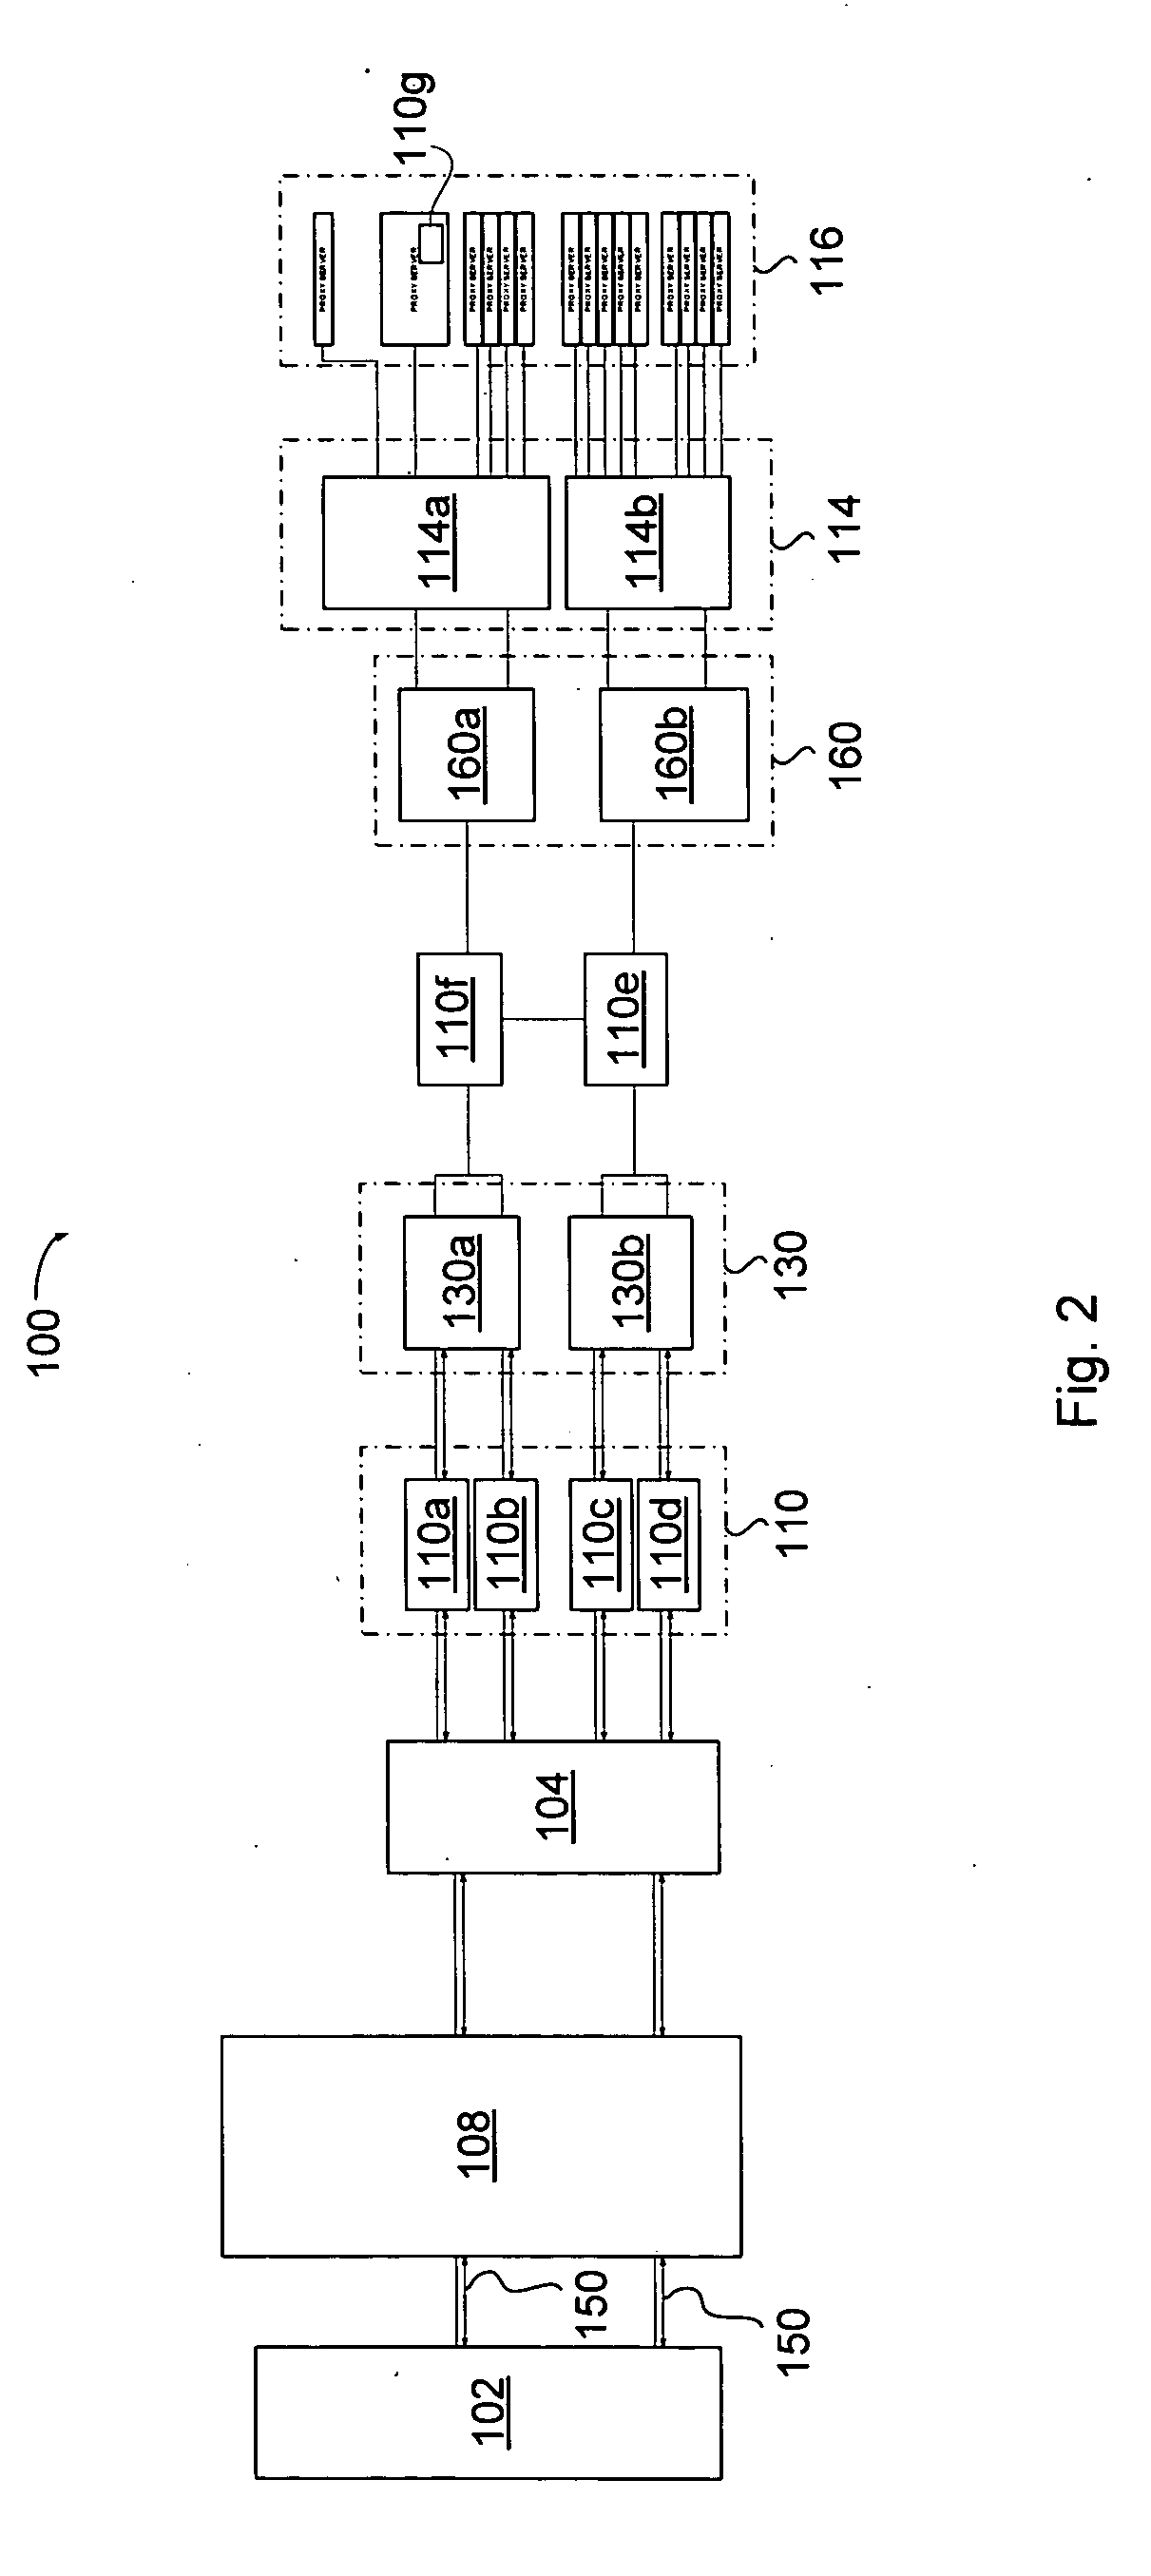 Voice over internet protocol data overload detection and mitigation system and method